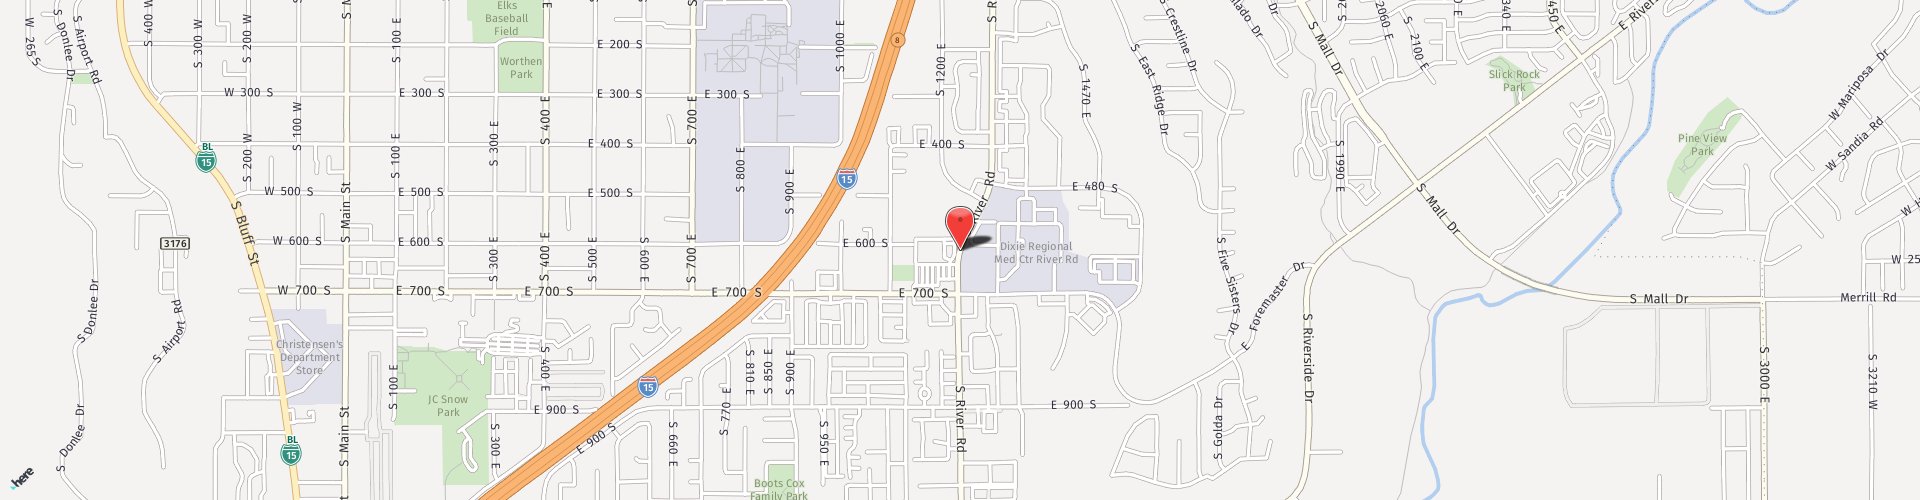 Location Map: 616 South River Road St. George, UT 84790